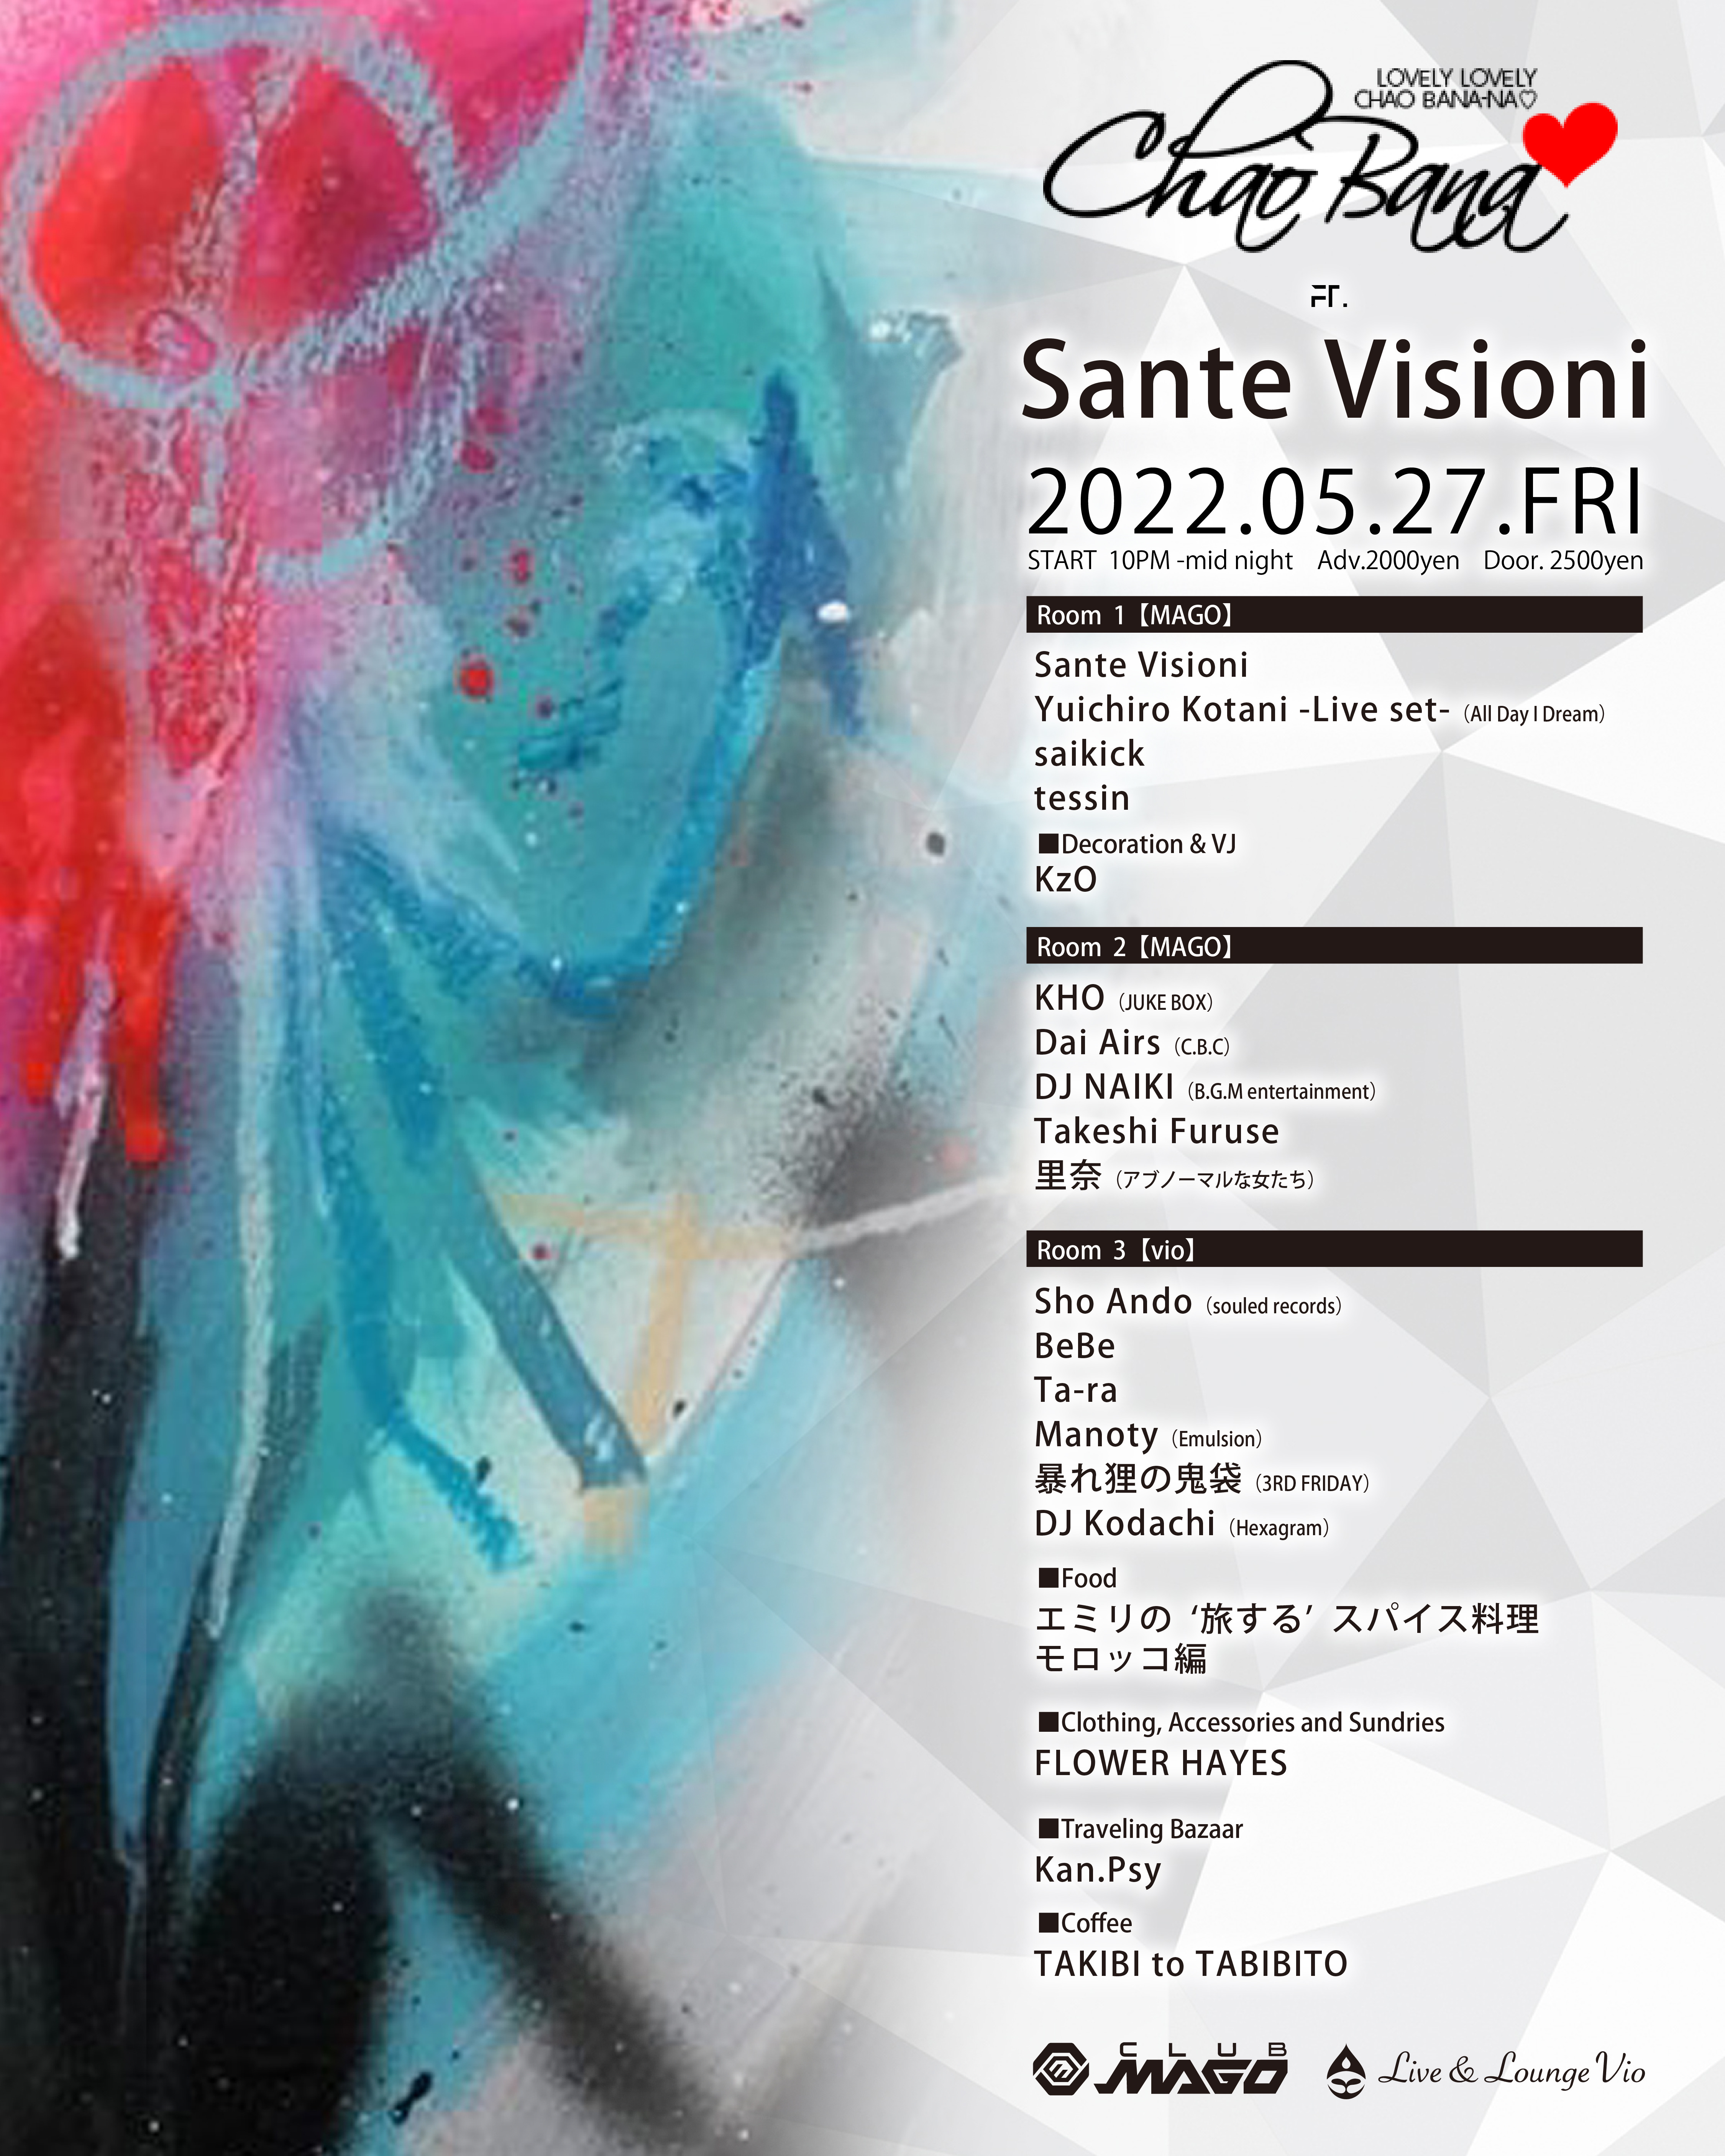 Lovely Lovely Chao Bana-na❤️ feat. Sante Visioni - Flyer front